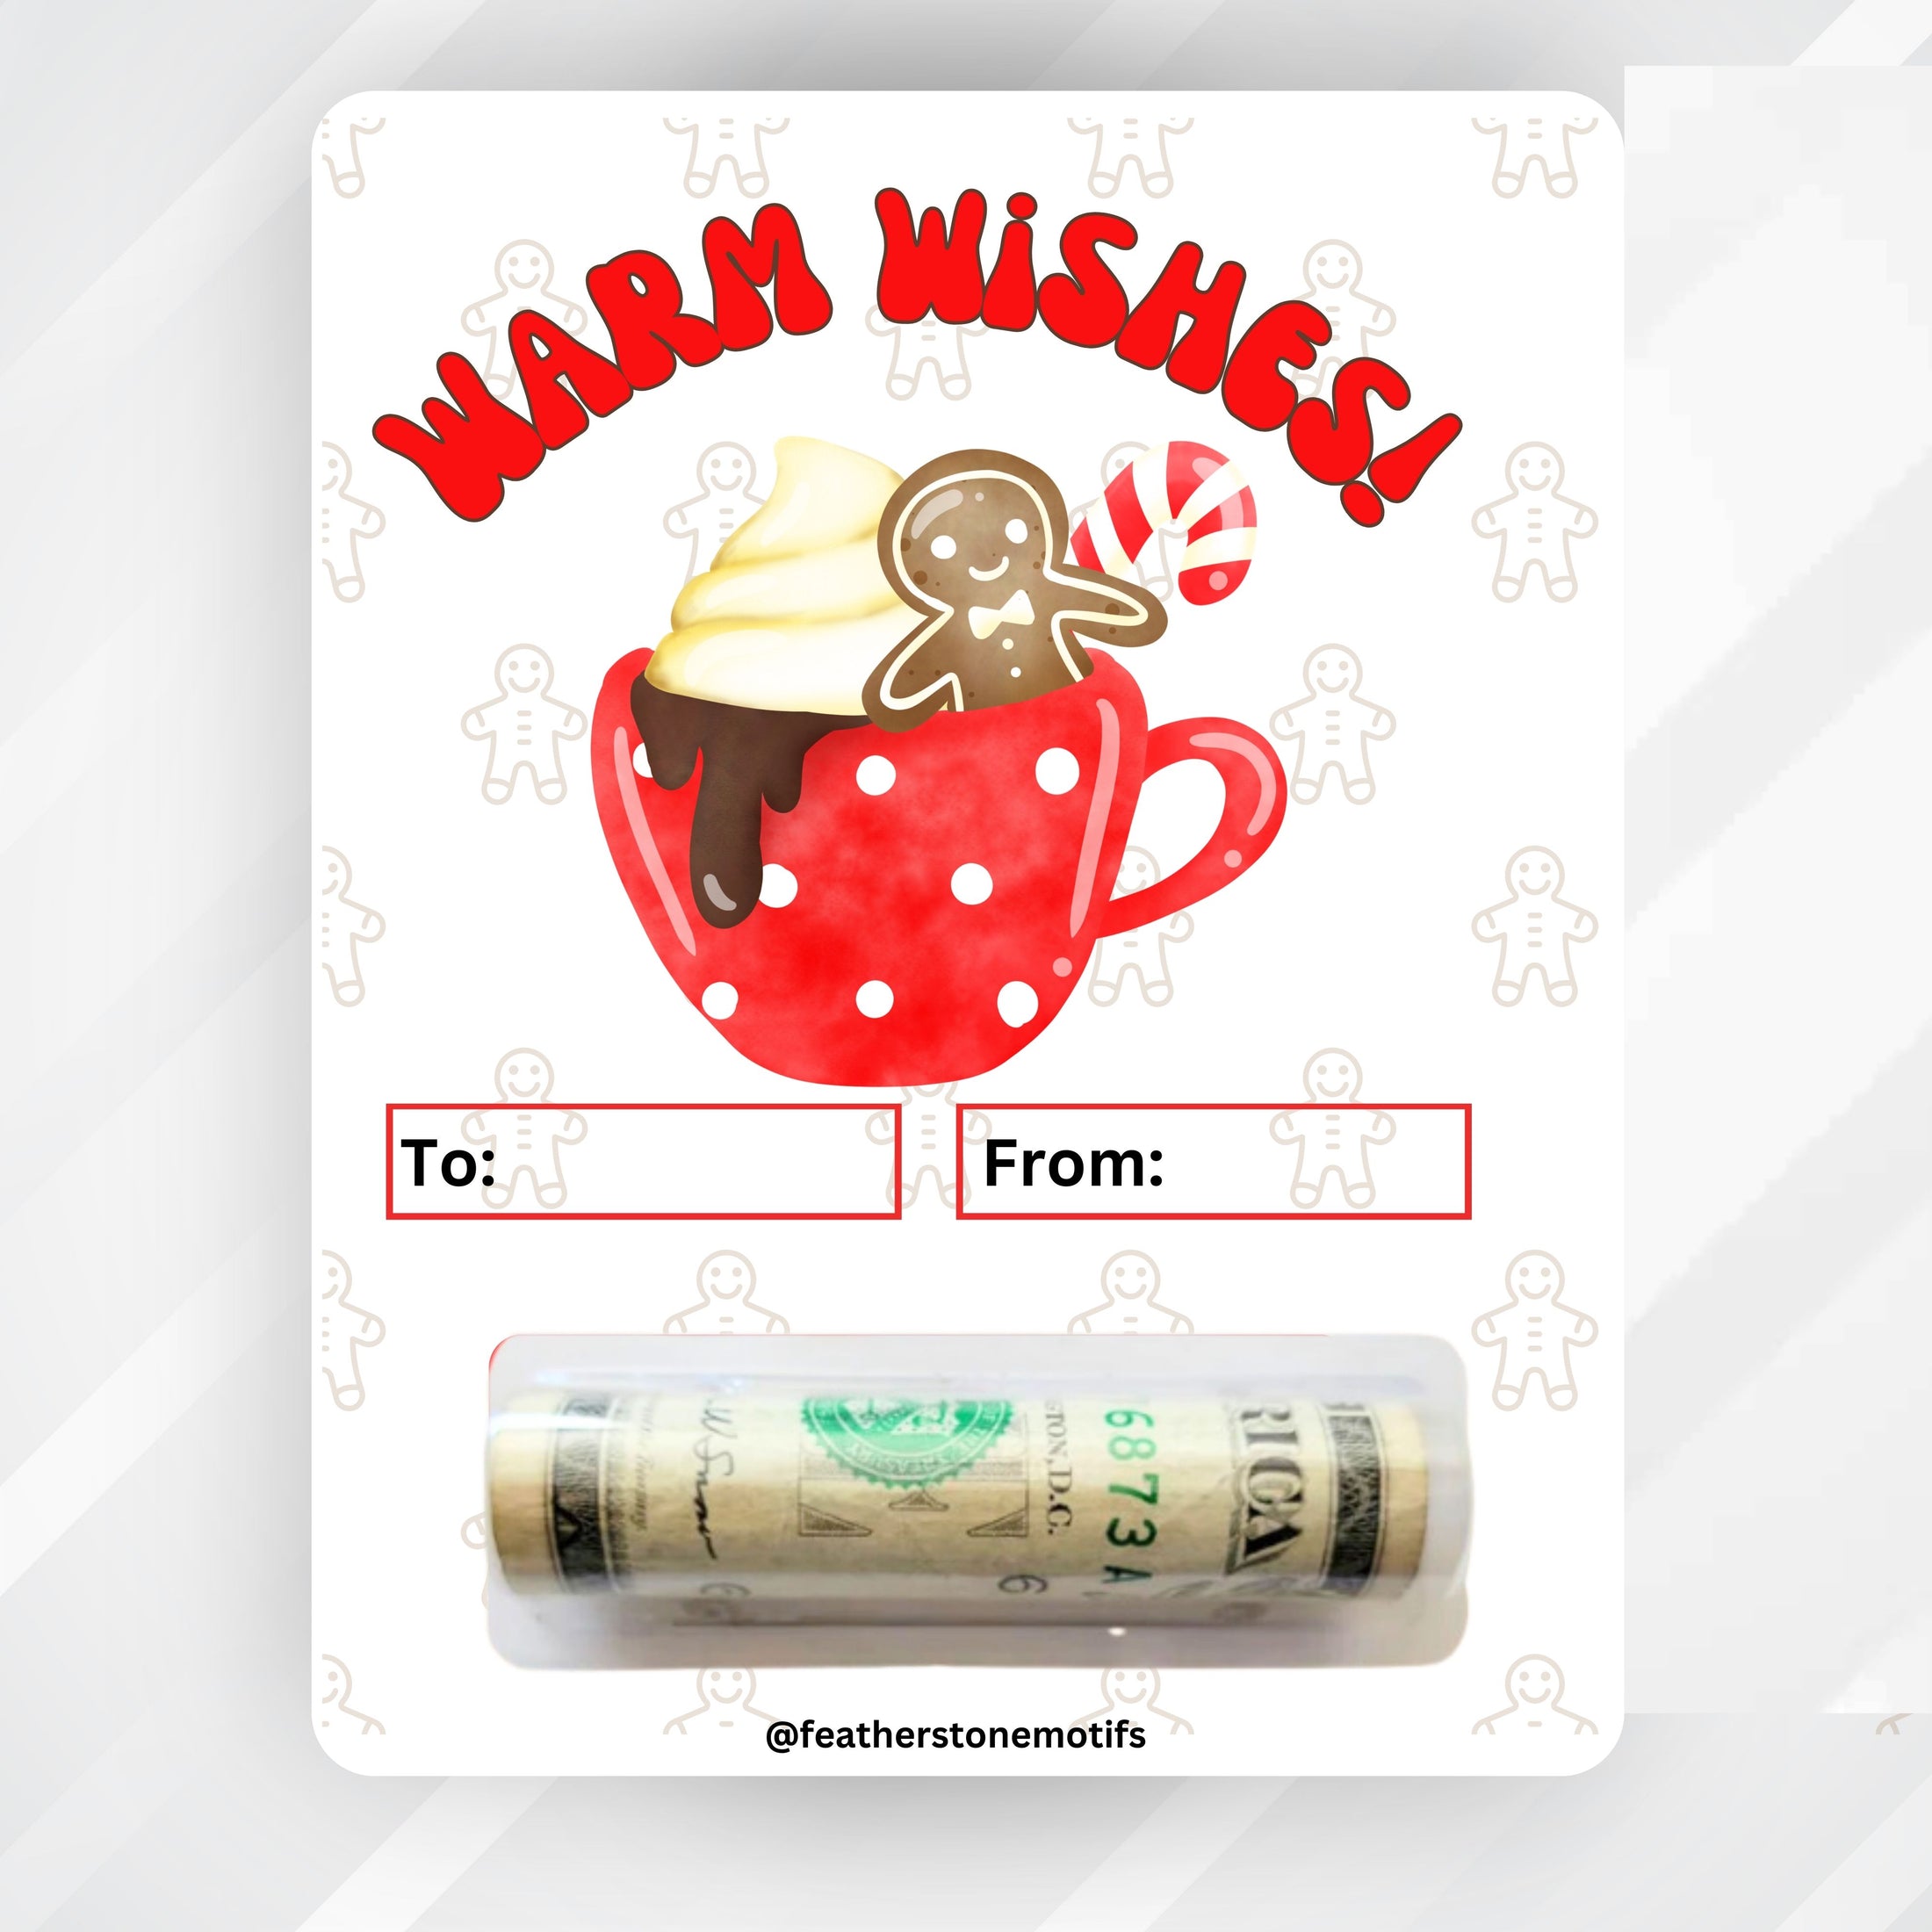 This image shows the money tube attached to the Warm Wishes money card.